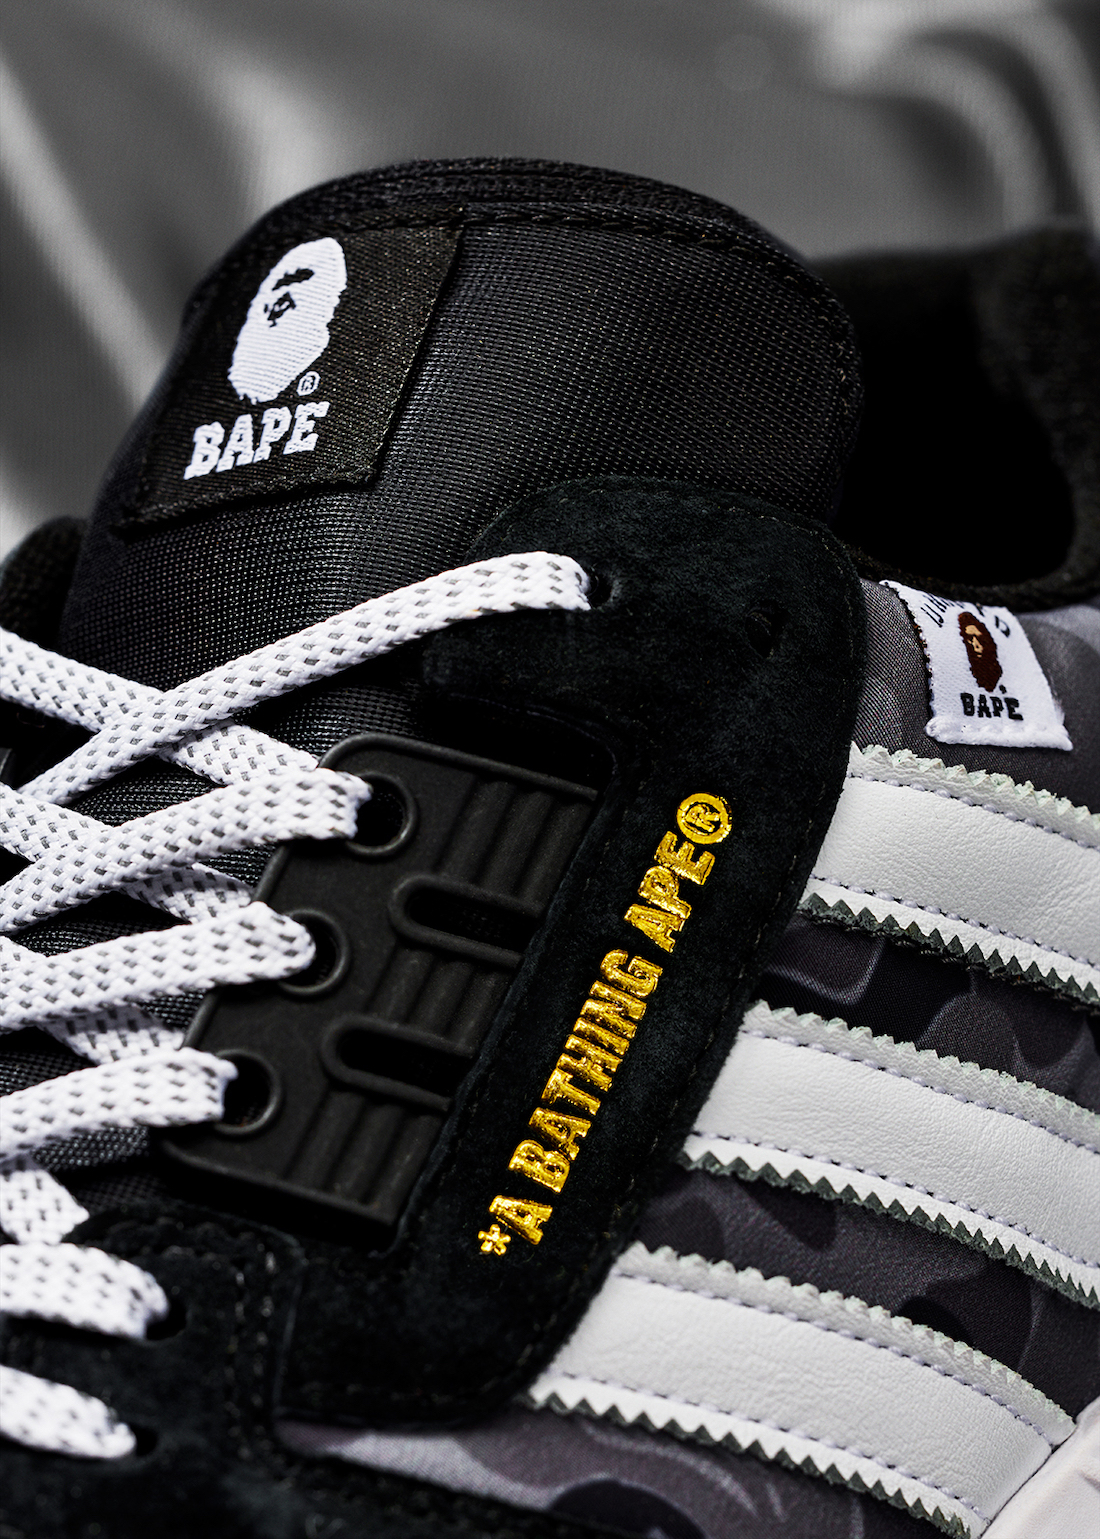 BAPE Undefeated adidas ZX 8000 FY8852 Release Date Price